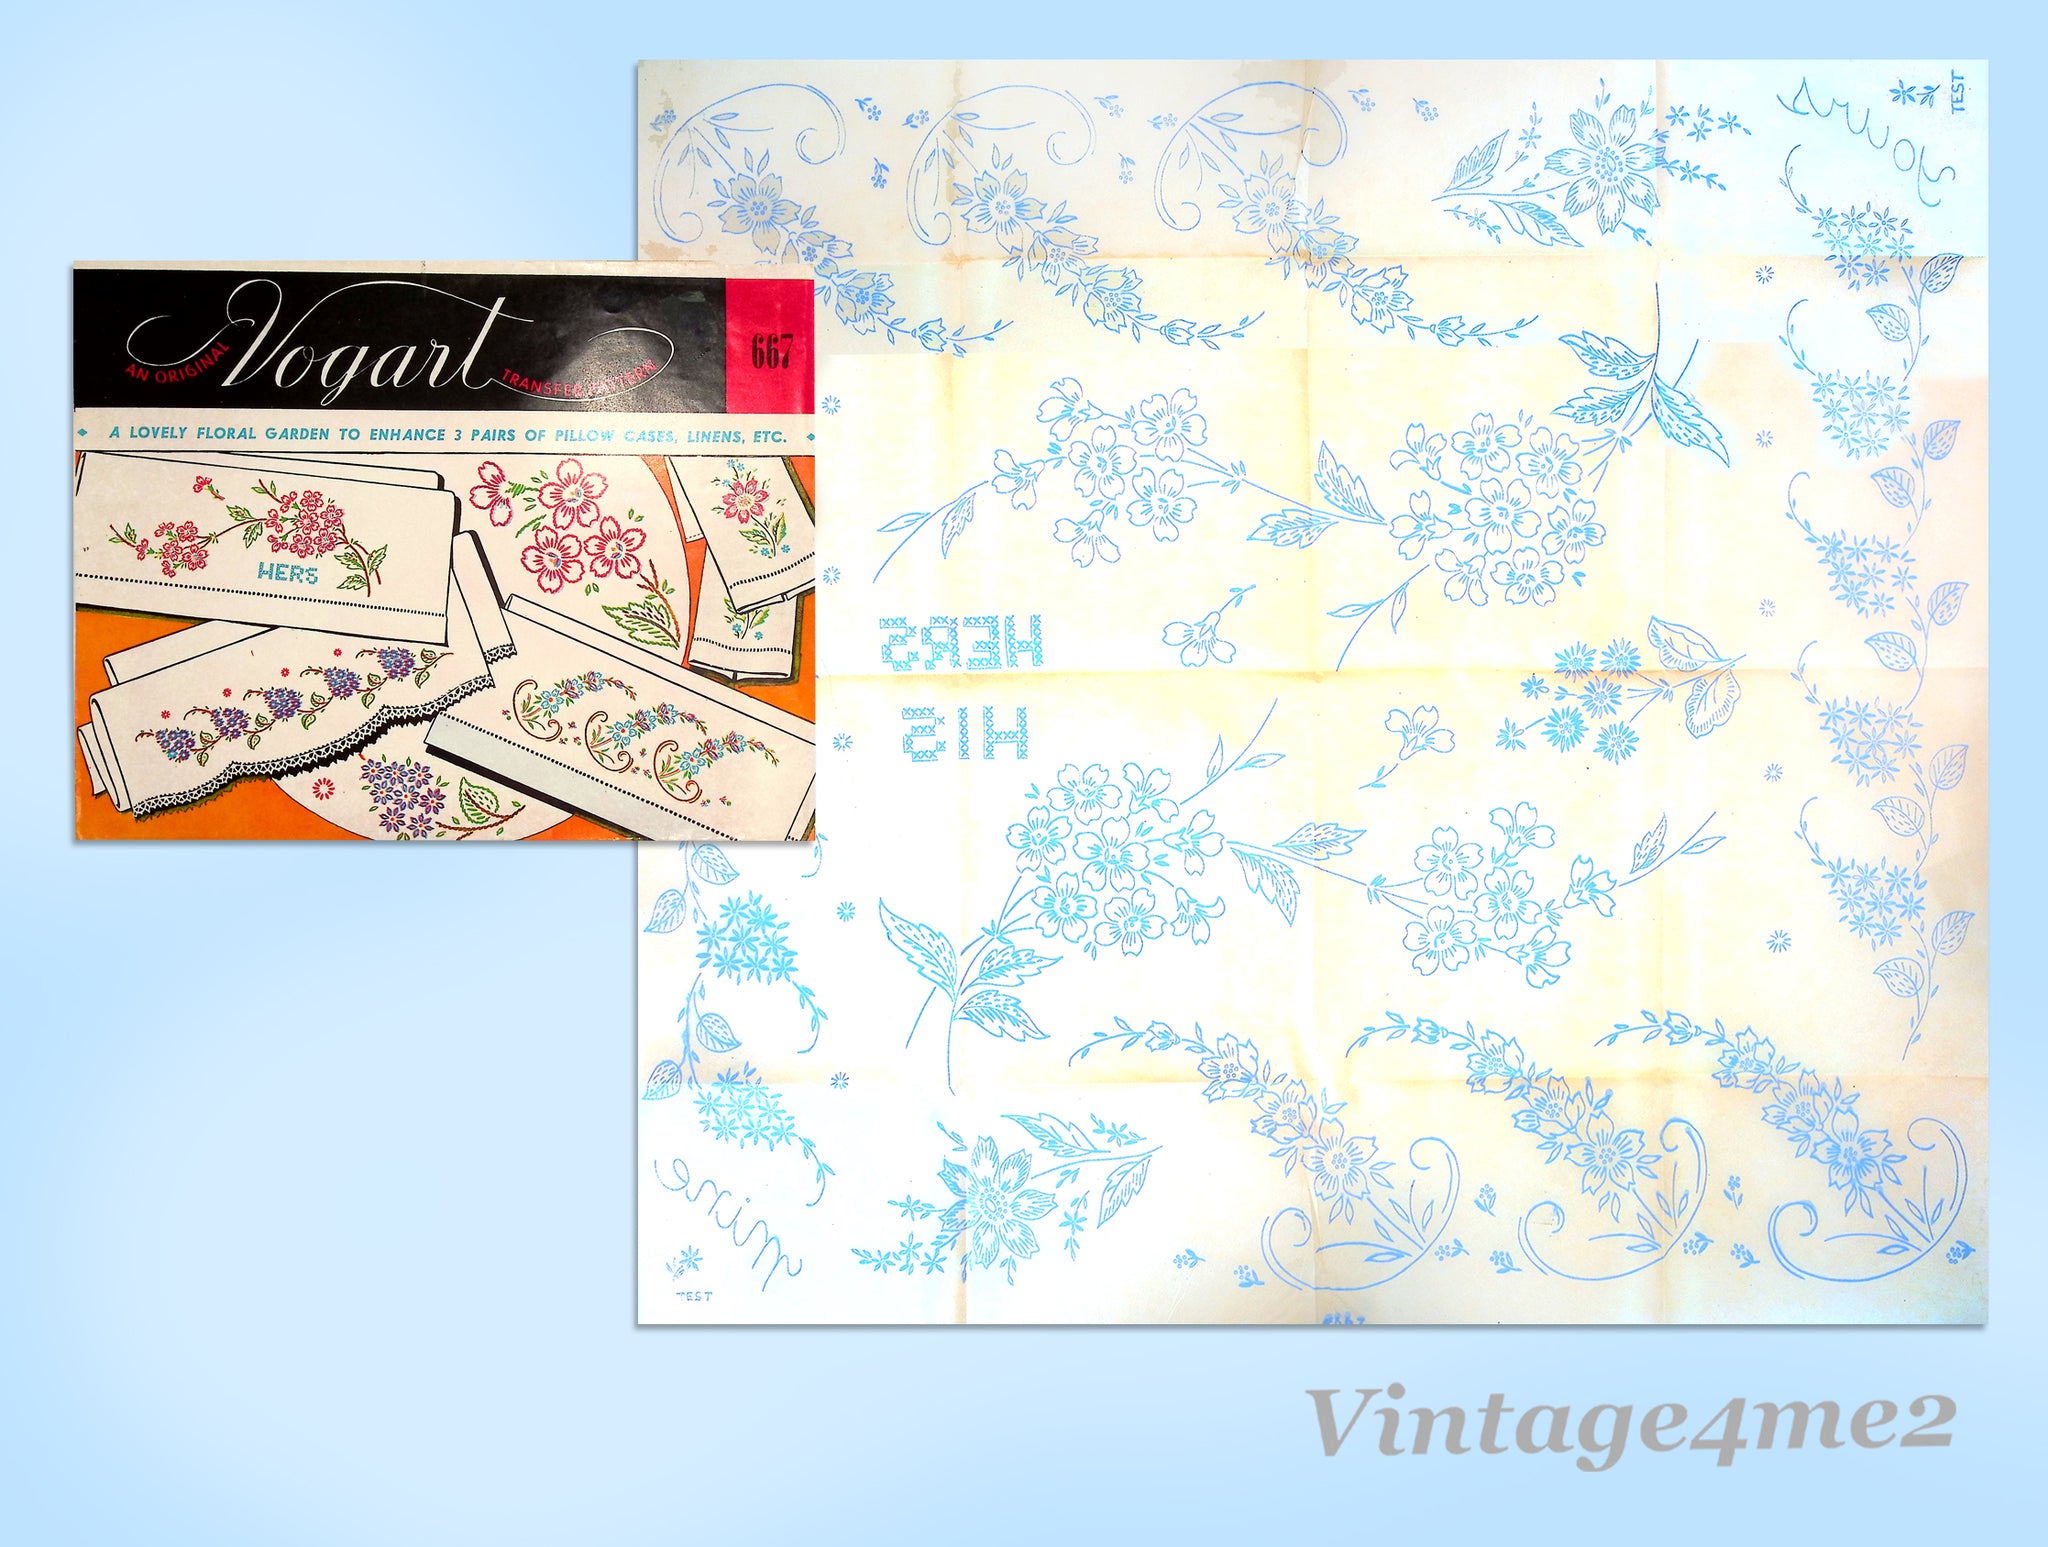 1950s Vintage Vogart Embroidery Transfer 240 Perky Pups Pillowcases –  Vintage4me2